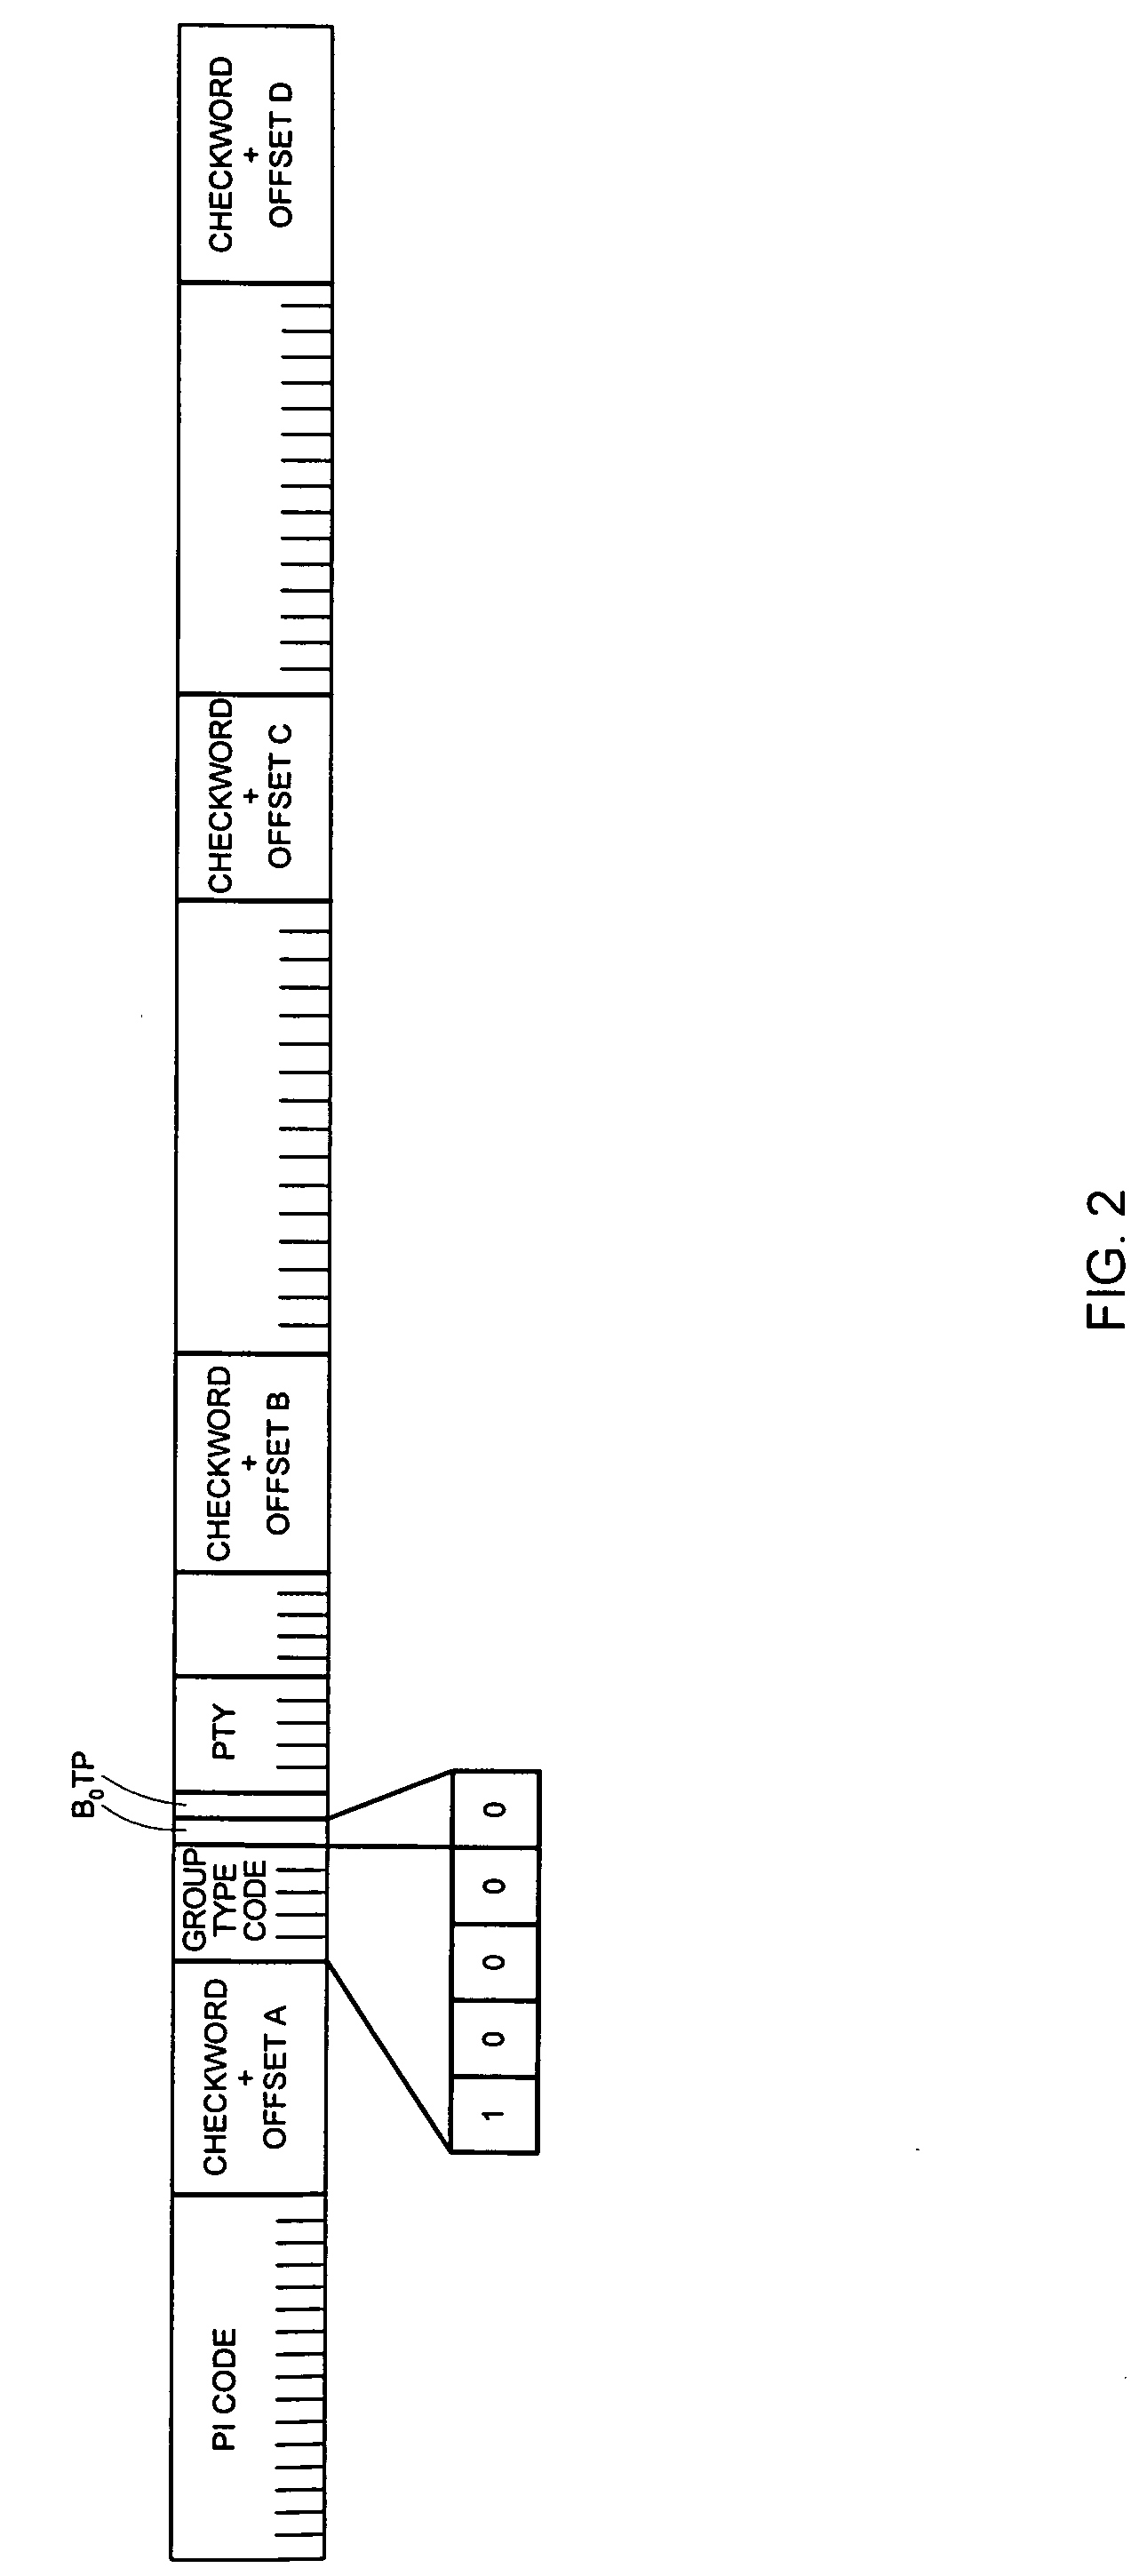 Receiver system for decoding data embedded in an electromagnetic signal